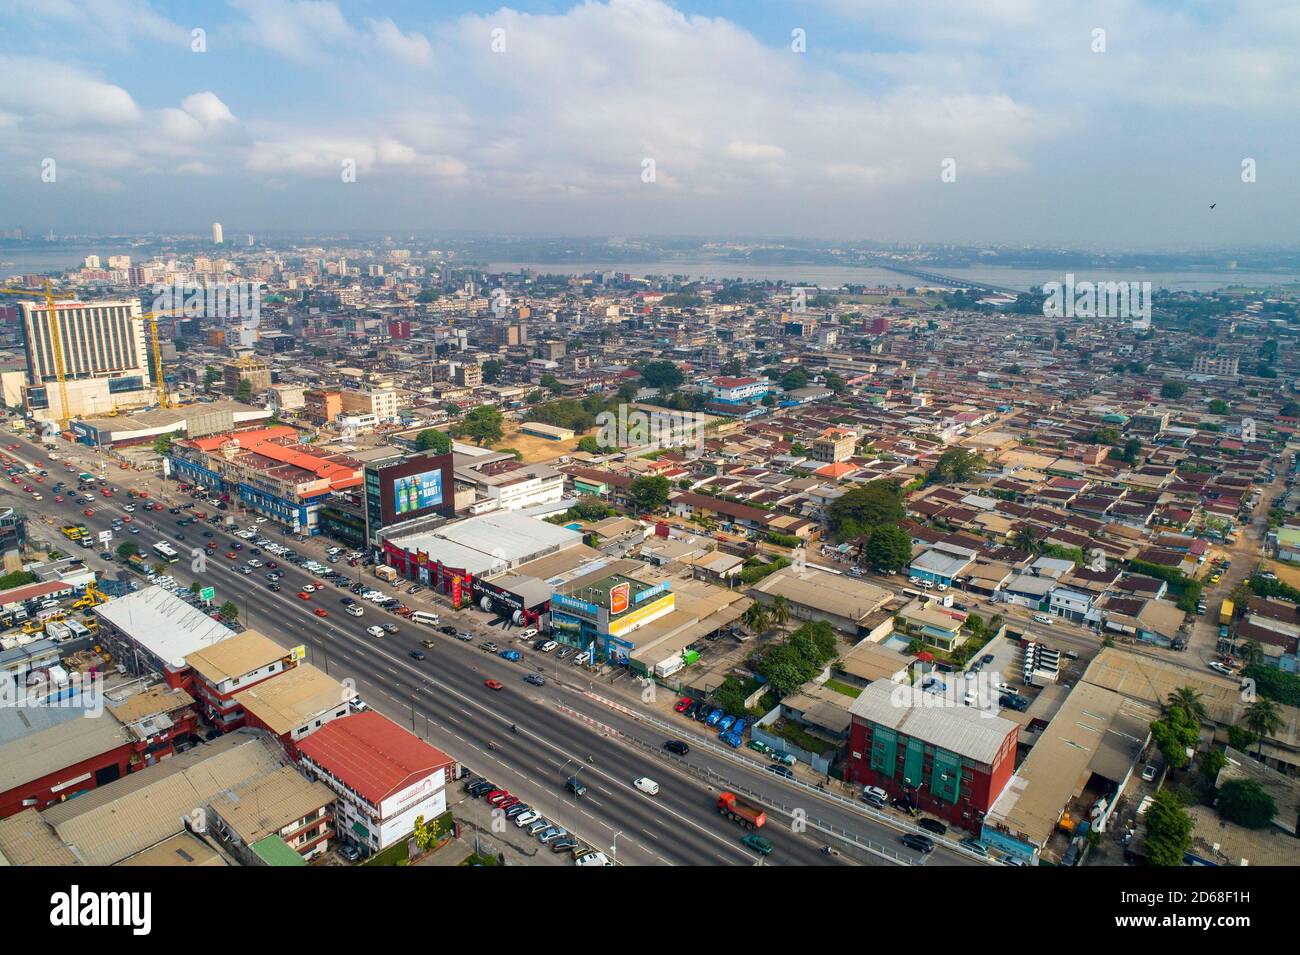 Cote d'Ivoire (Ivory Coast), Abidjan: aerial view of the district of Marcory Potopoto along Boulevard Valery Giscard d'Estaing Stock Photo